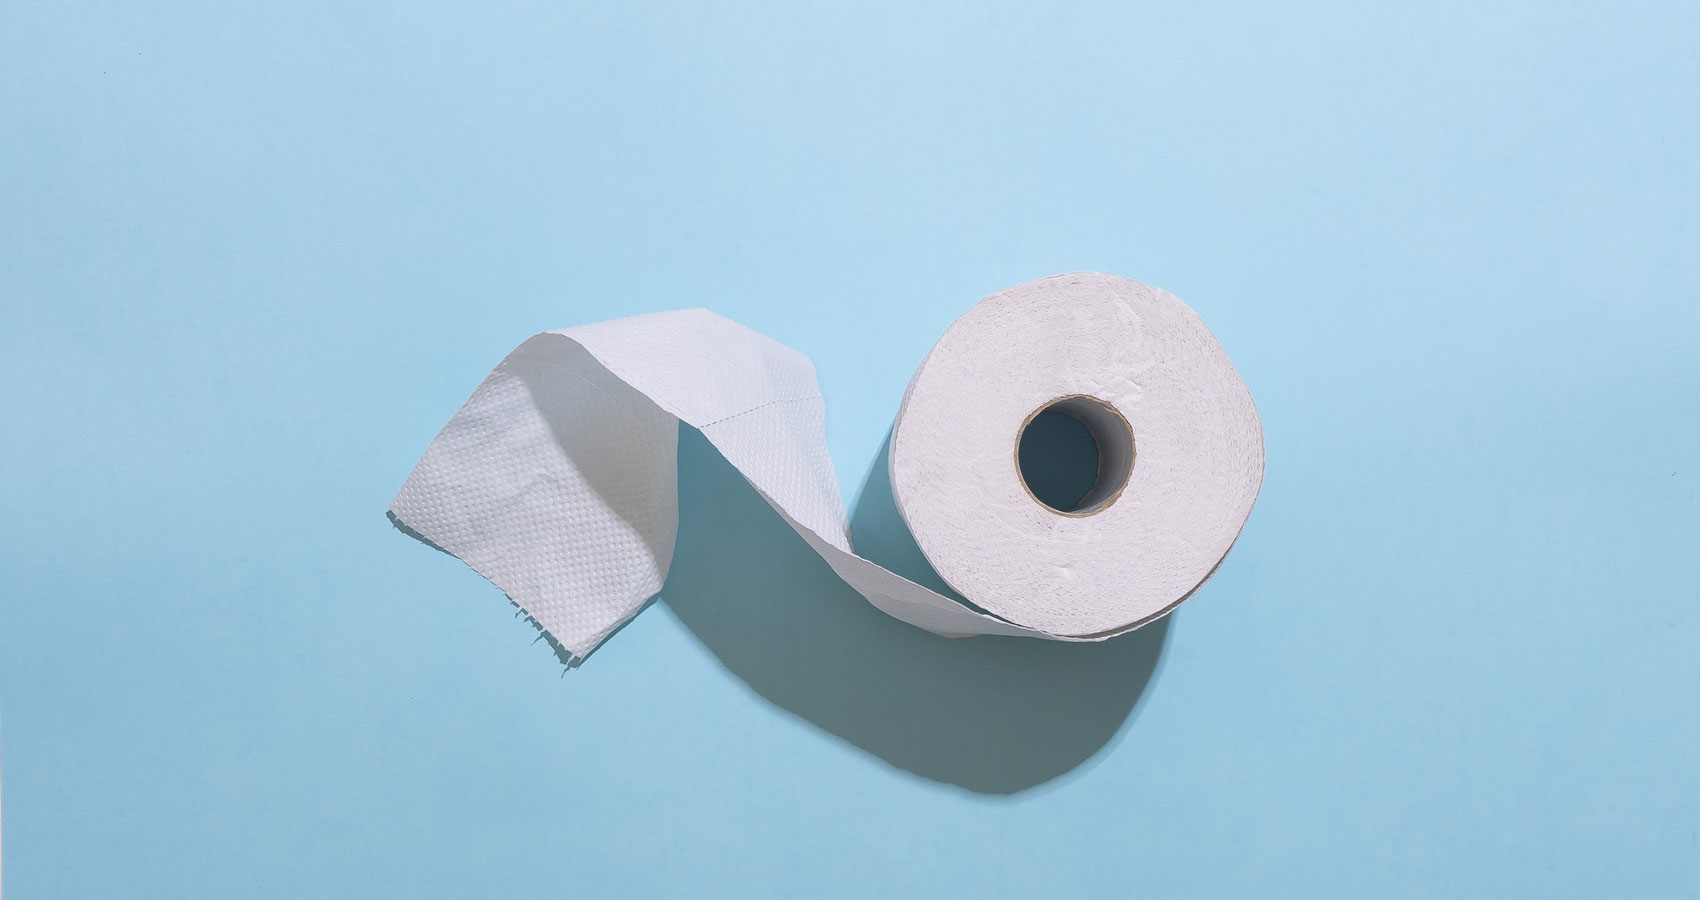 The King of Toilet Paper, a short story by Mark Kodama at Spillwords.com